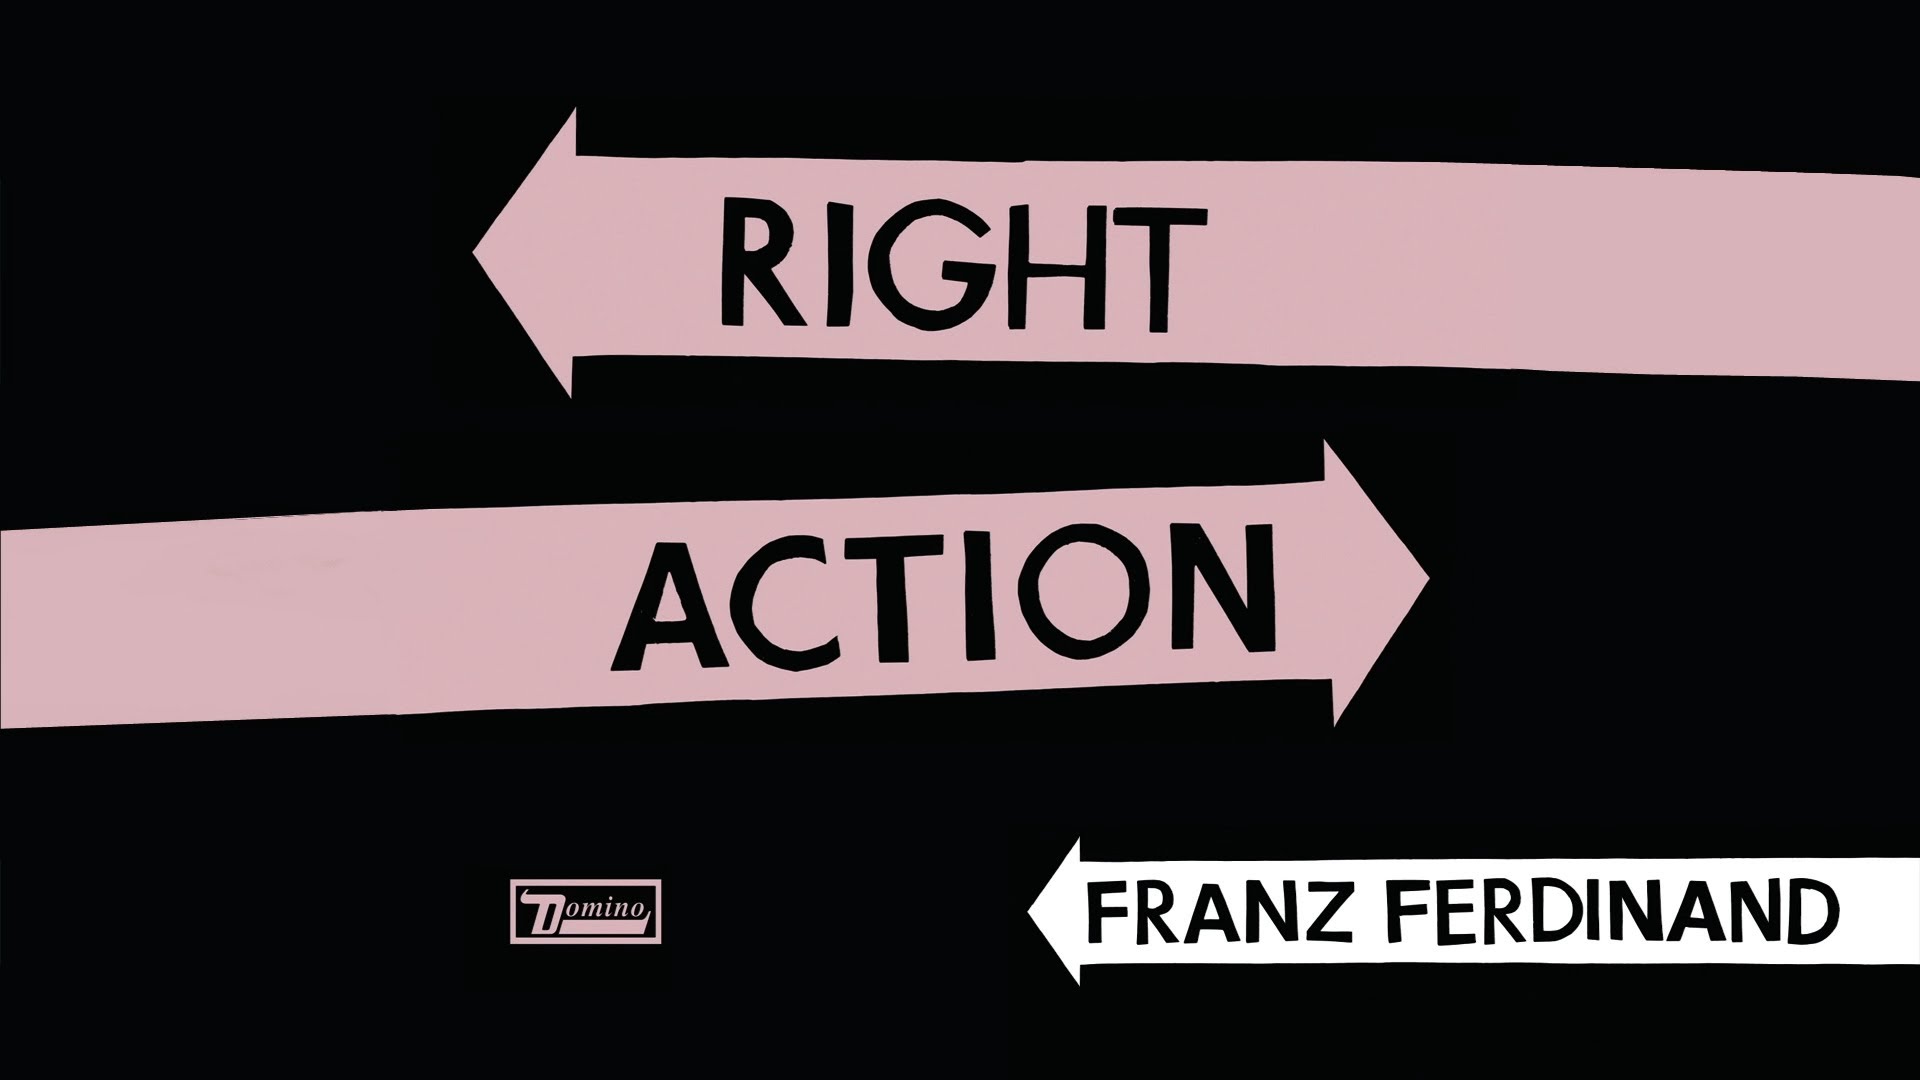 Franz Ferdinand Release New Singles Right Action and Love